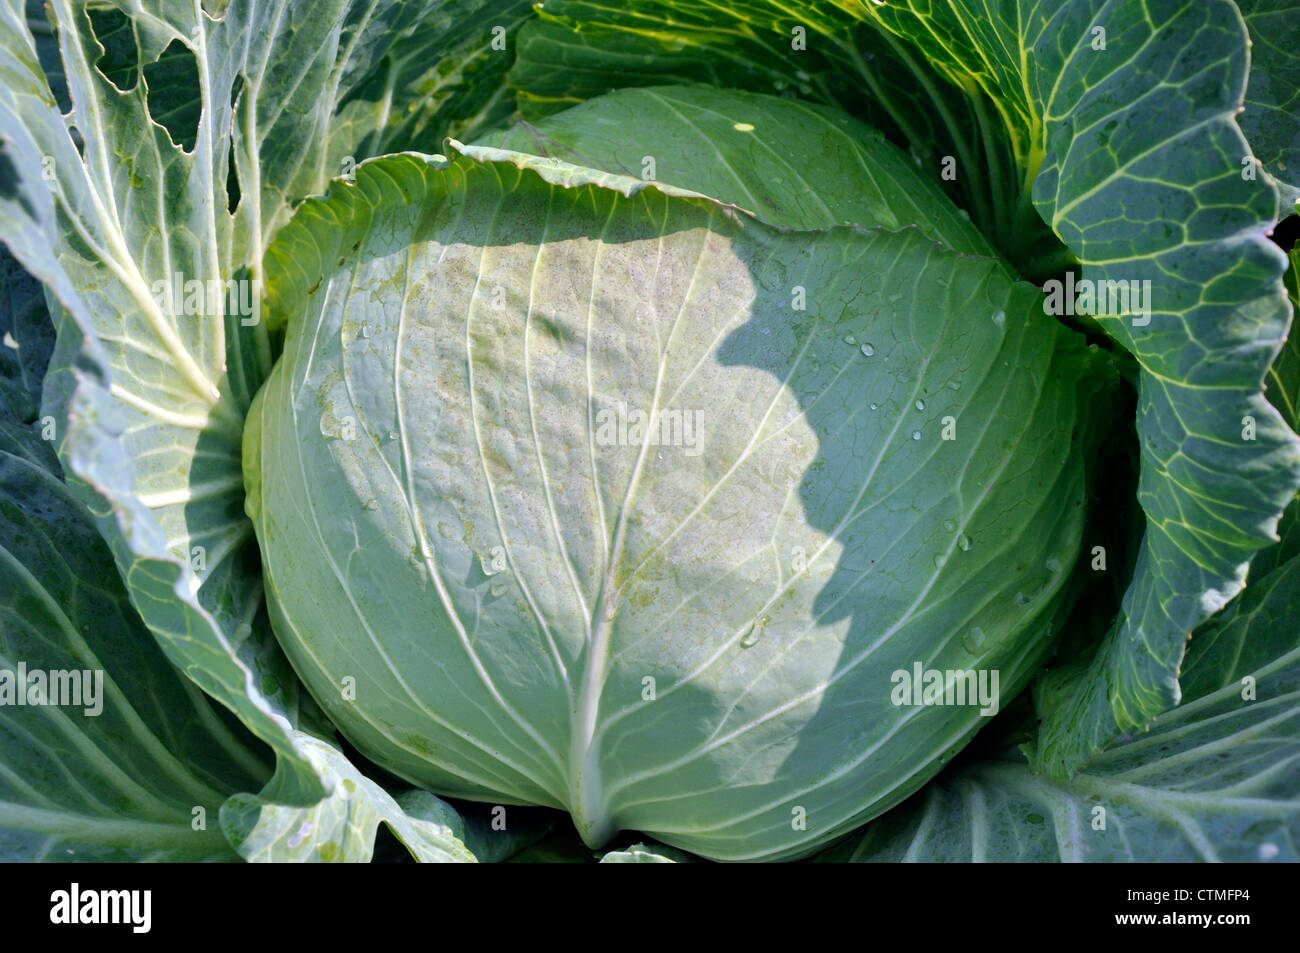 Head of fresh cabbage with a lot of leaves Stock Photo